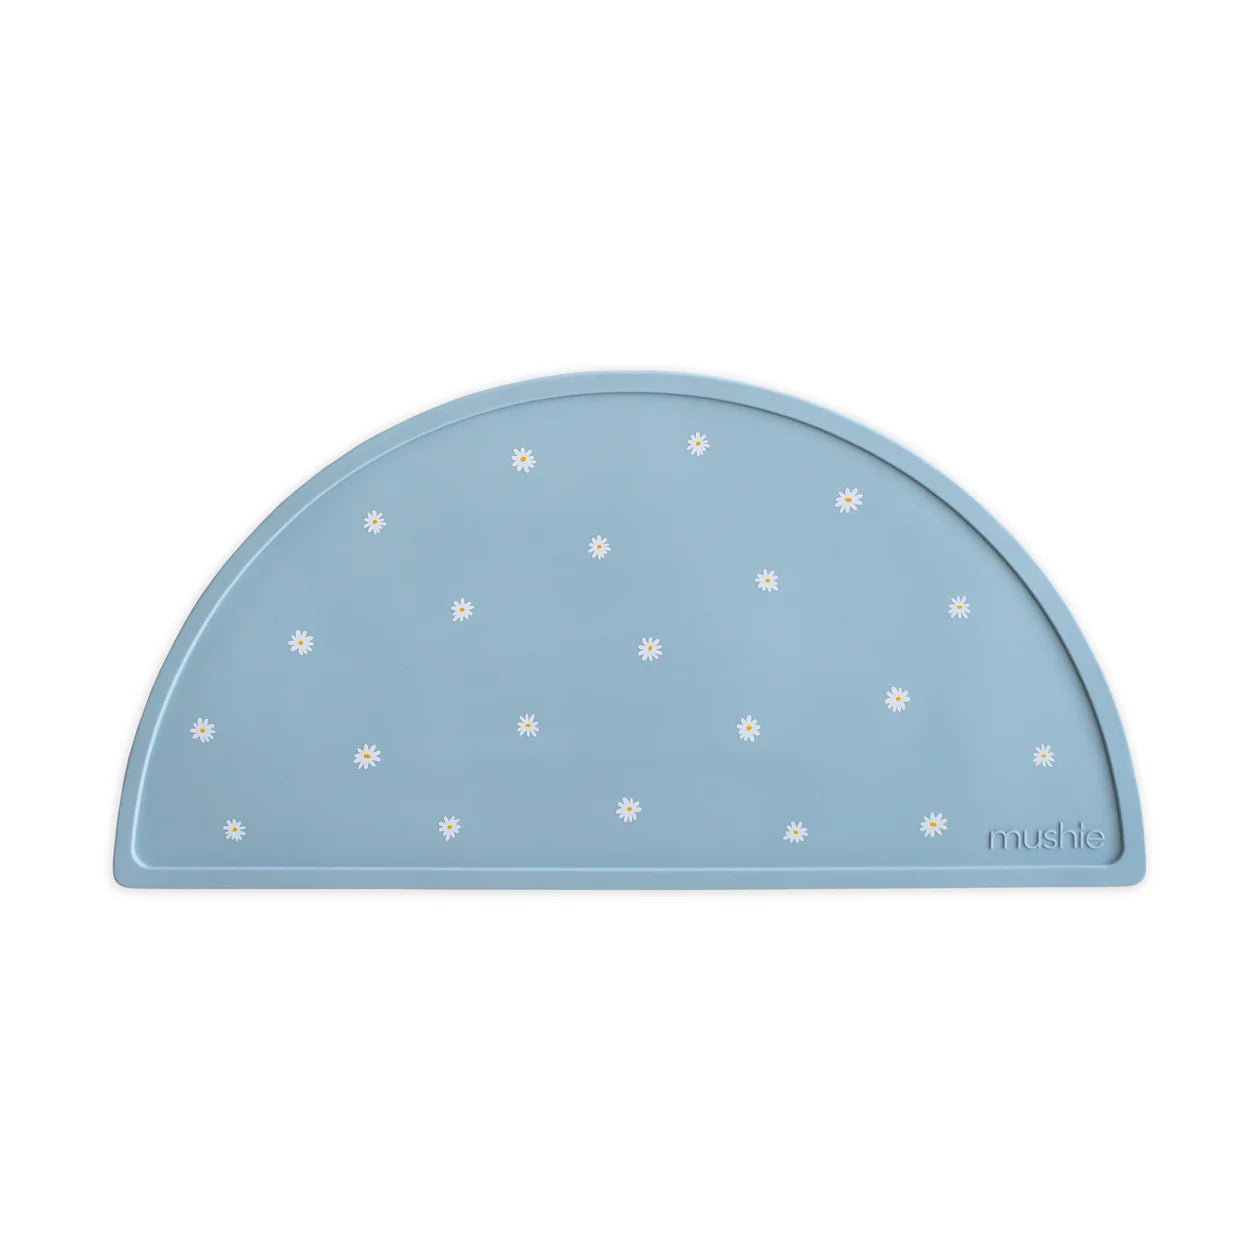 Mushie Silicone Place Mat